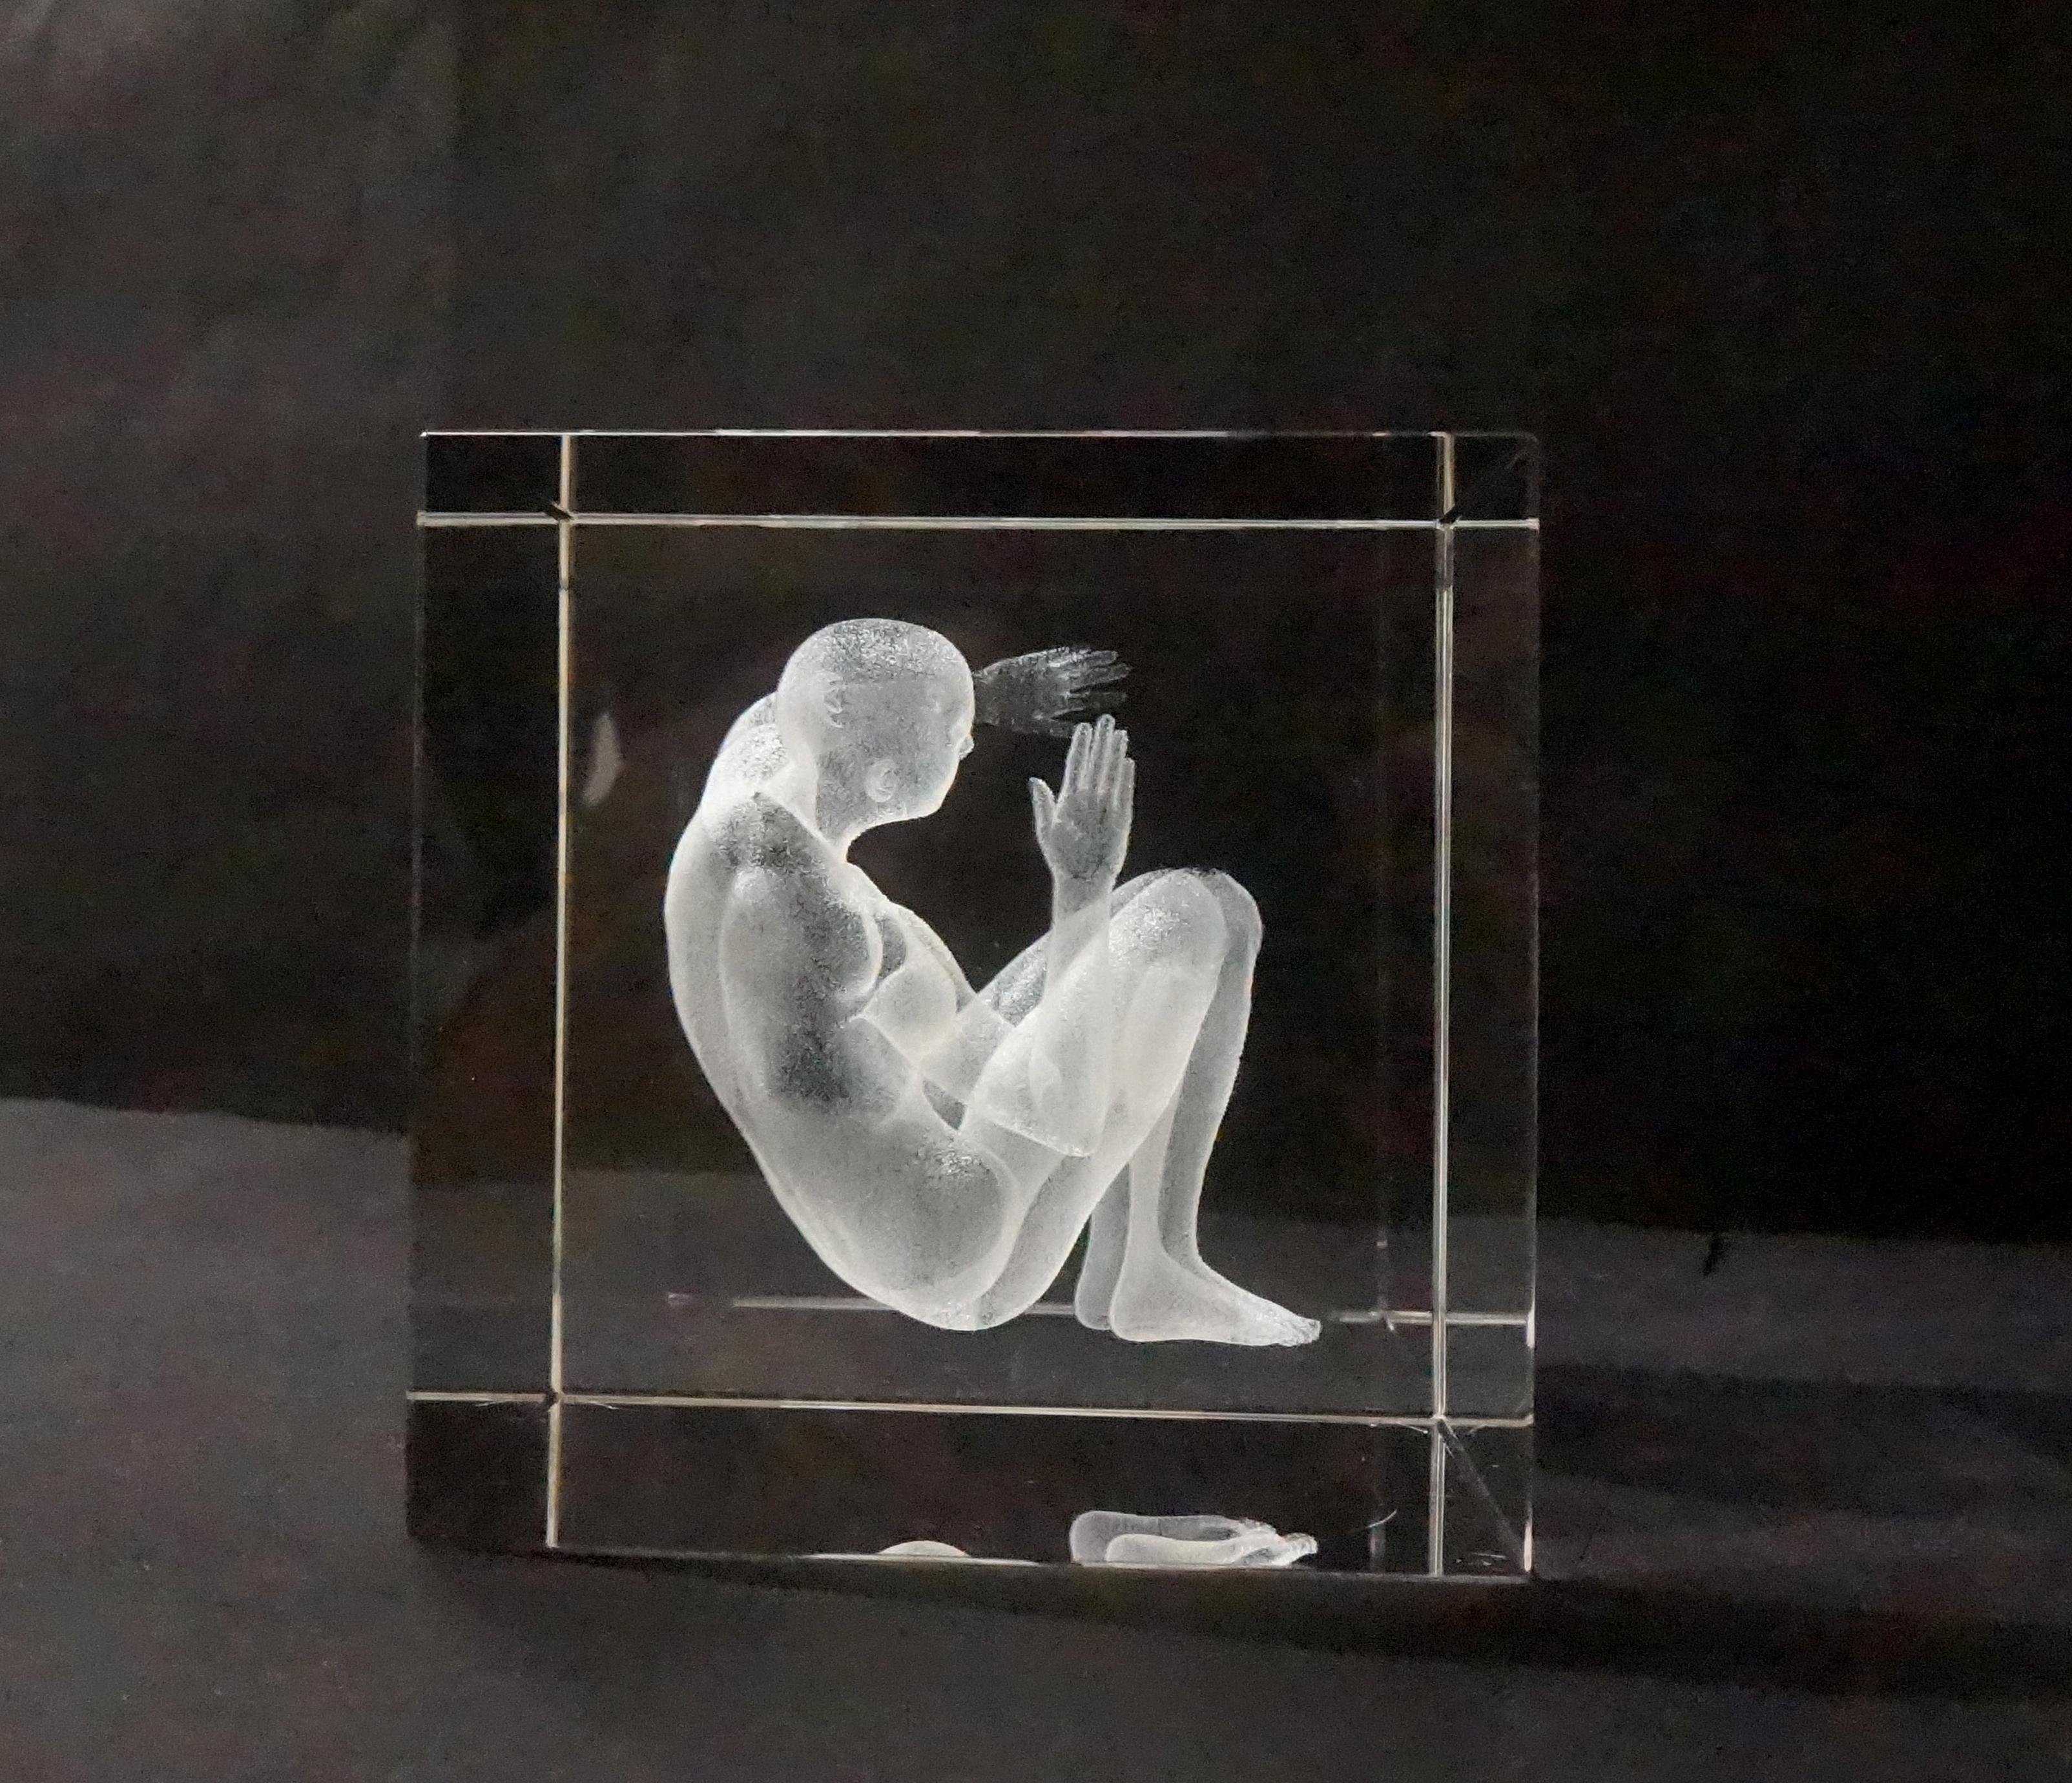 Trapped Woman
Crystal Glass, Solid Marble, Laser Engraving
8x8 cm

About Artist
As an artist who lives in İstanbul and collaborates with the fields of historiography, politics and sociology, the works I have produced in the last twenty years are